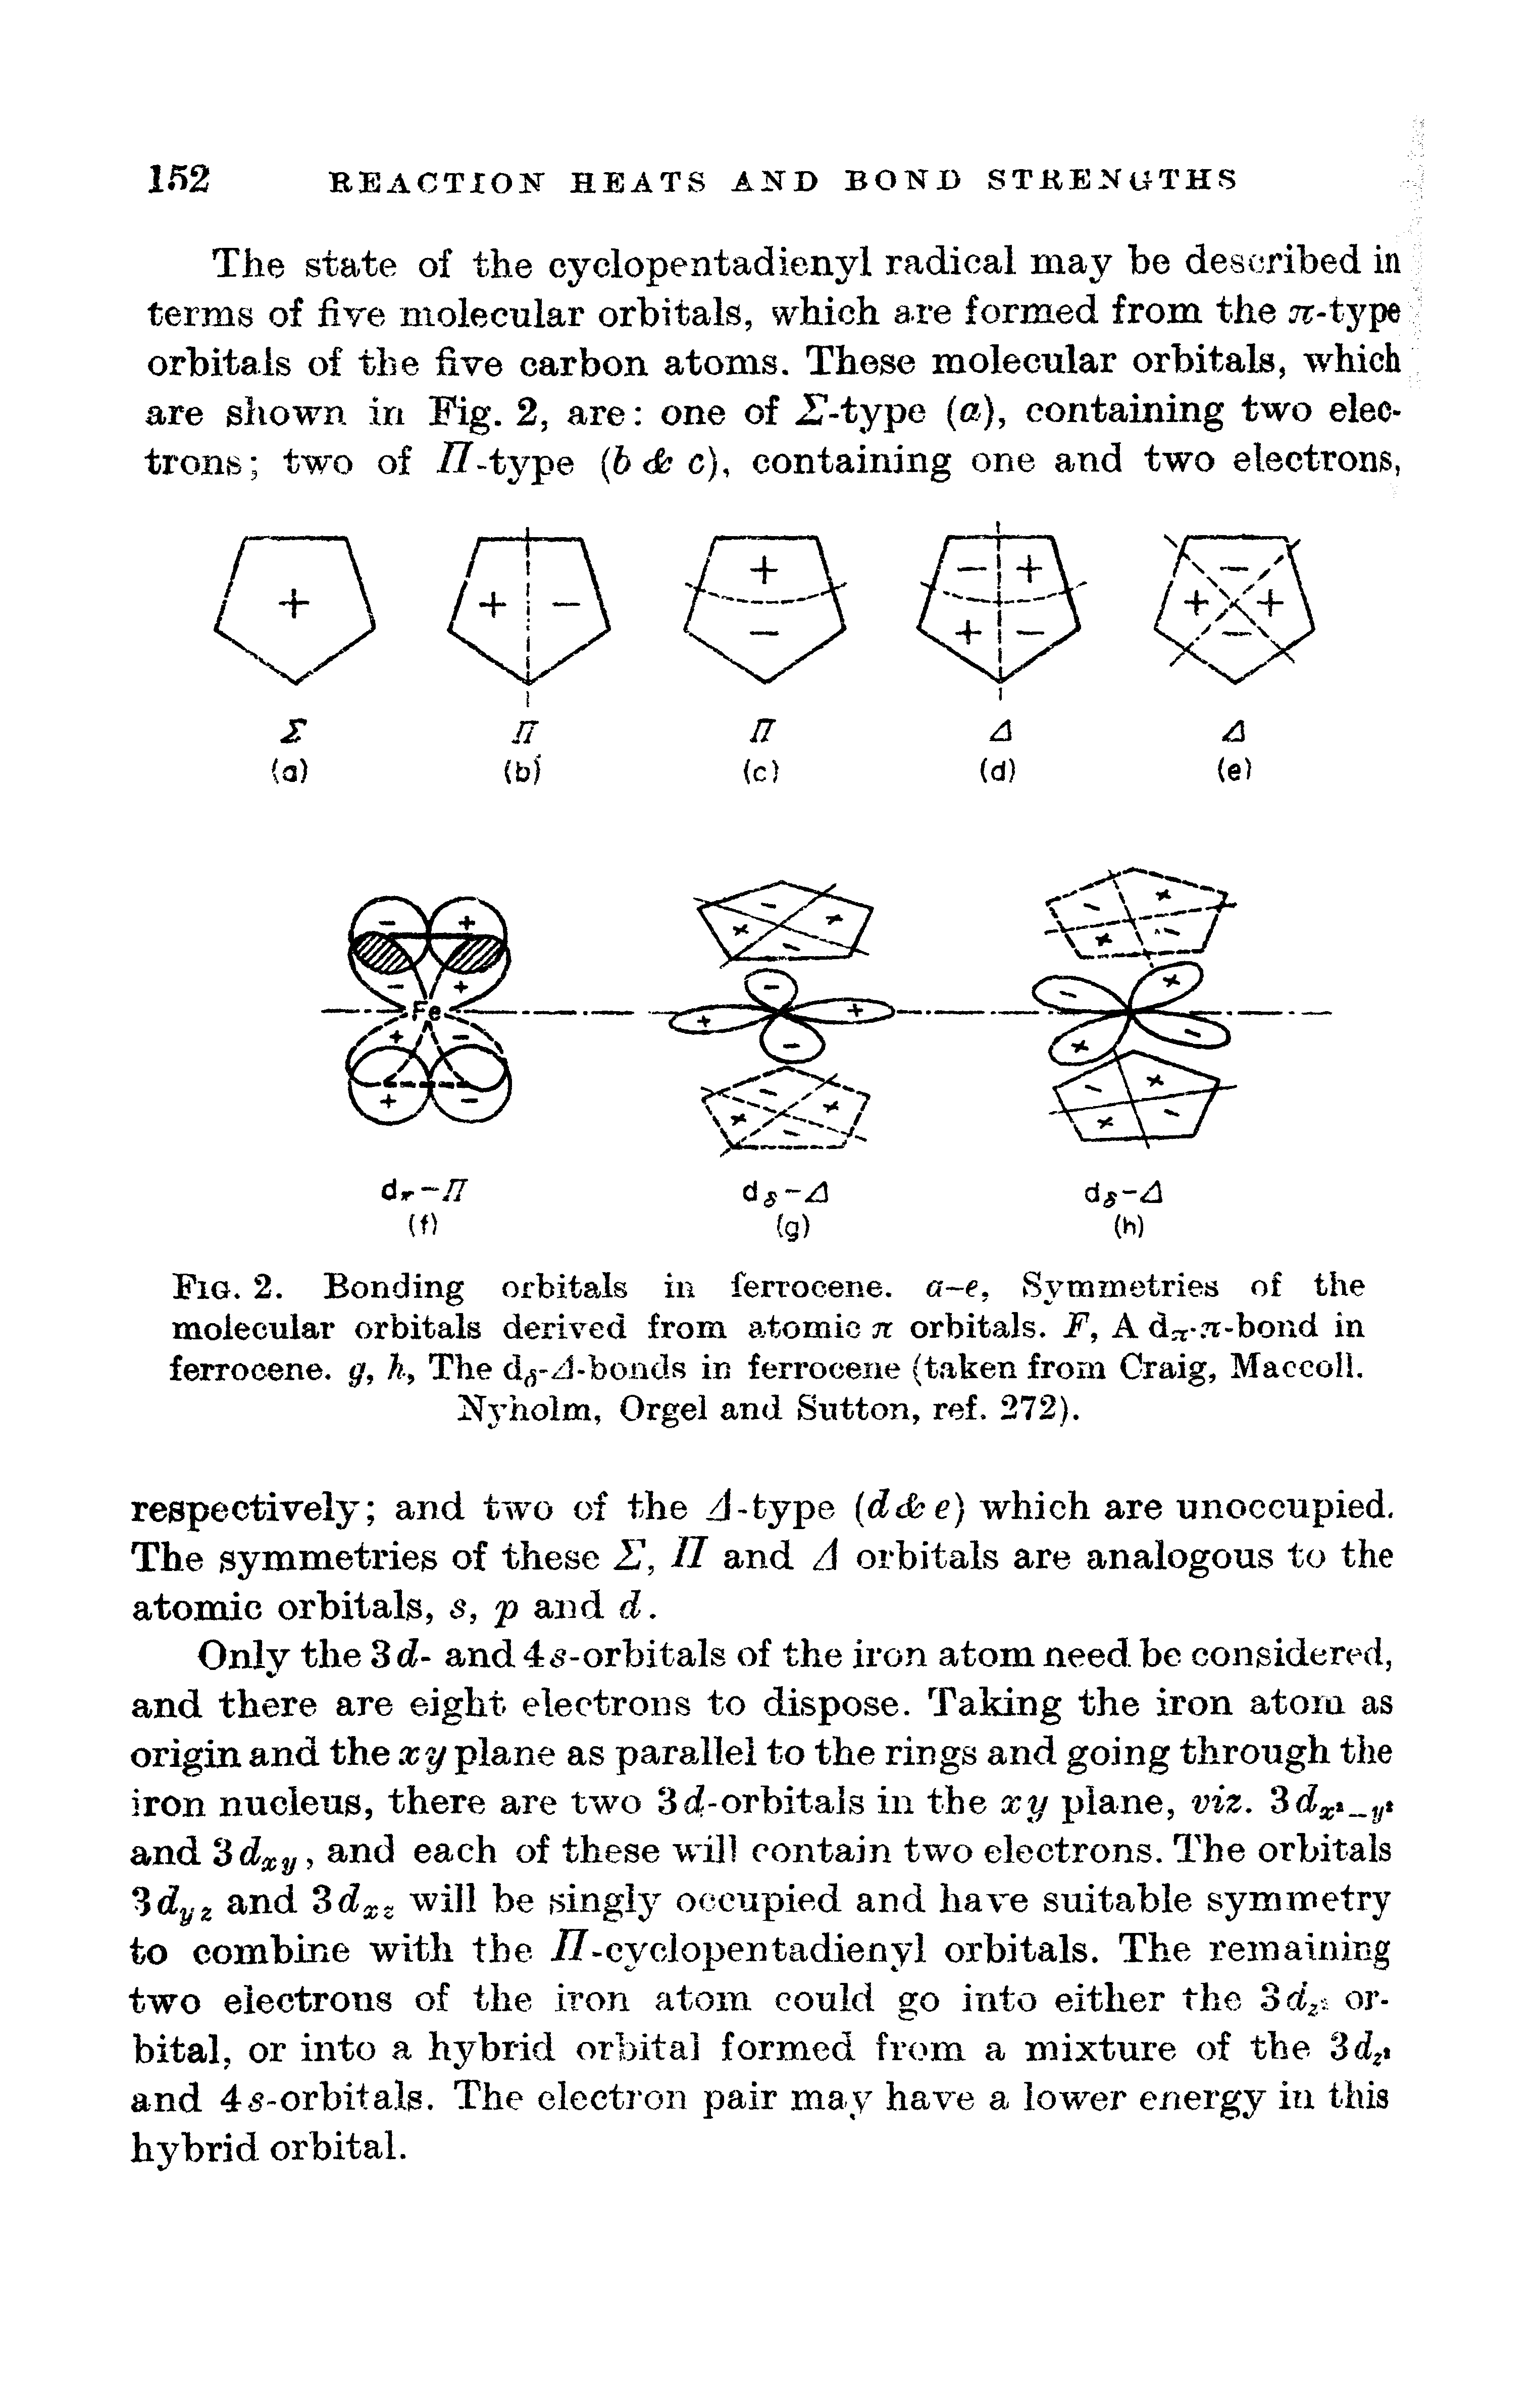 Fig. 2. Bonding orbitals in ferrocene. a e. Symmetries of the molecular orbitals derived from atomic n orbitals. F, A d n-hond in ferrocene, g, The d -zl-bonds in ferrocene (taken from Craig, Maccoll. Nyholm, Orgei and Sutton, ref. 272).